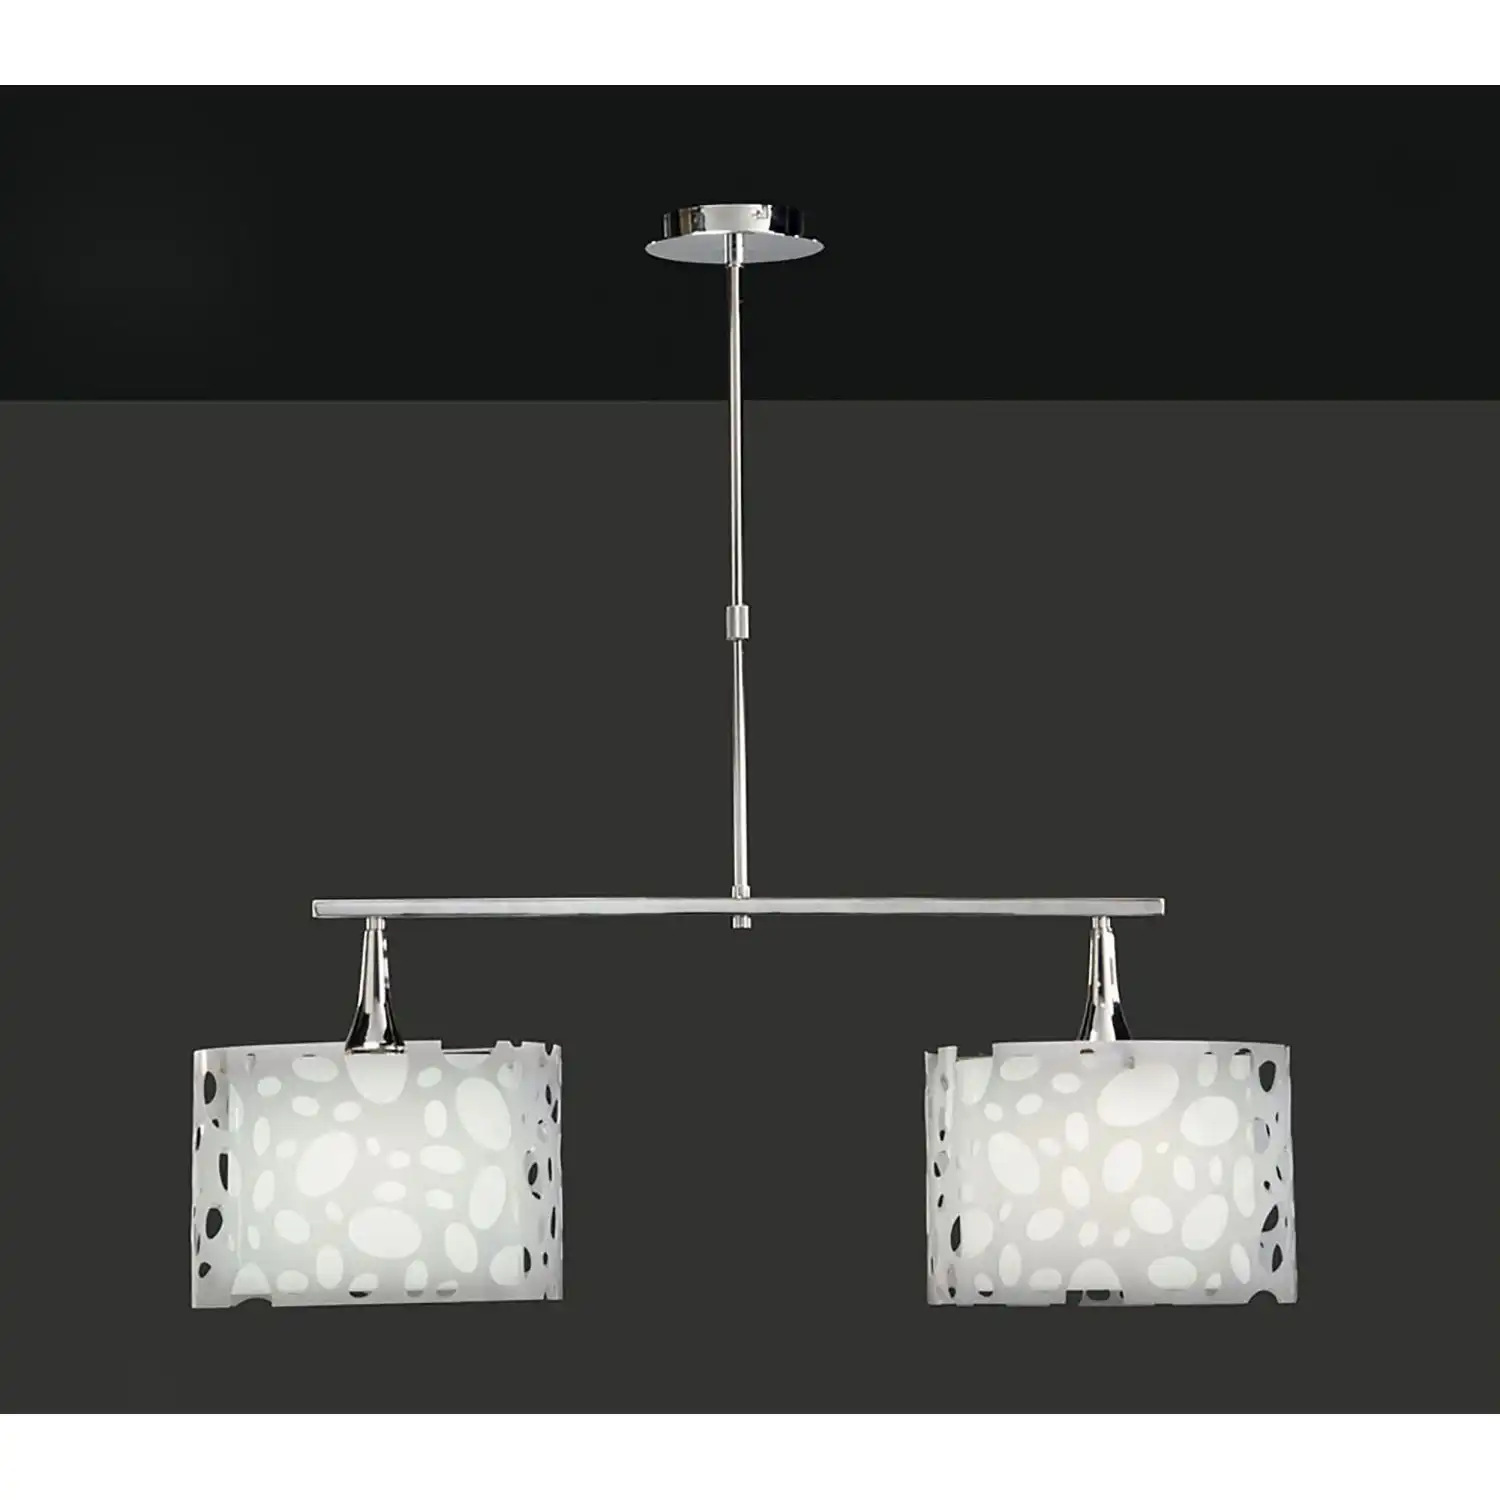 Lupin Linear Pendant 2 Light E27 Line Large, Gloss White, White Acrylic, Polished Chrome, CFL Lamps INCLUDED